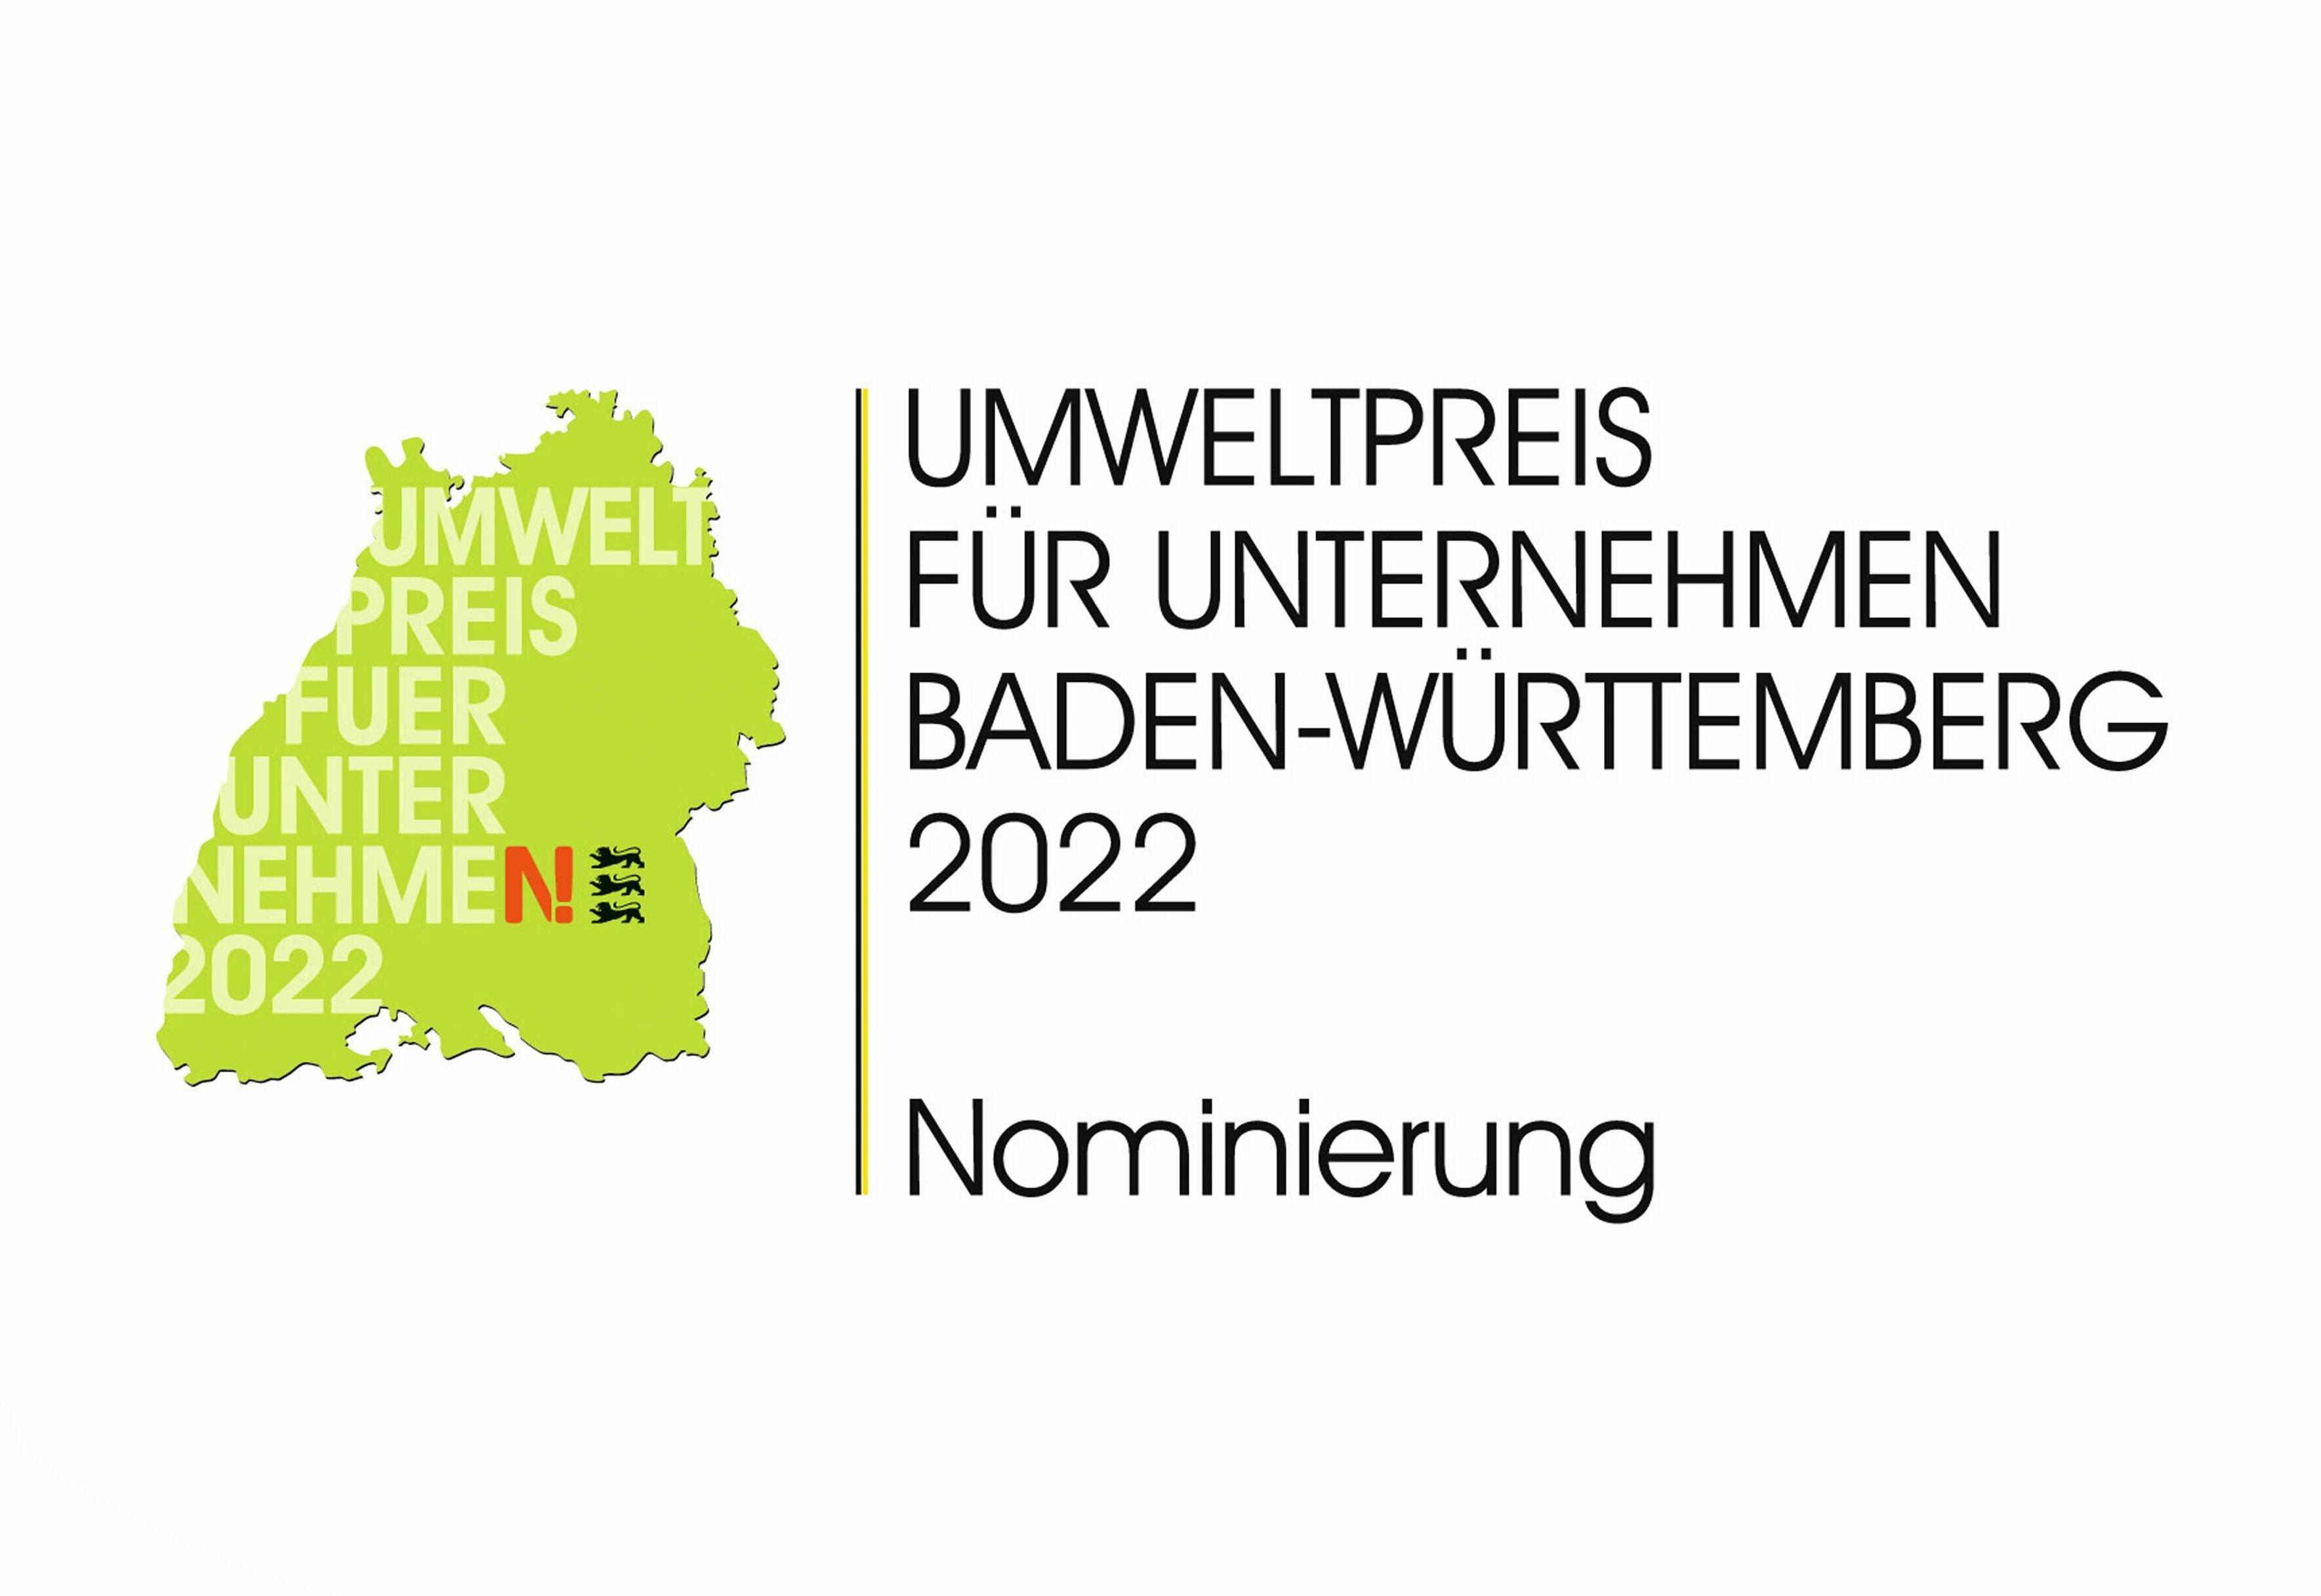 SÜDPACK nominated for the 2022 Environmental Award of the State of Baden-Württemberg in the category "Industrial Companies with more than 250 Employees